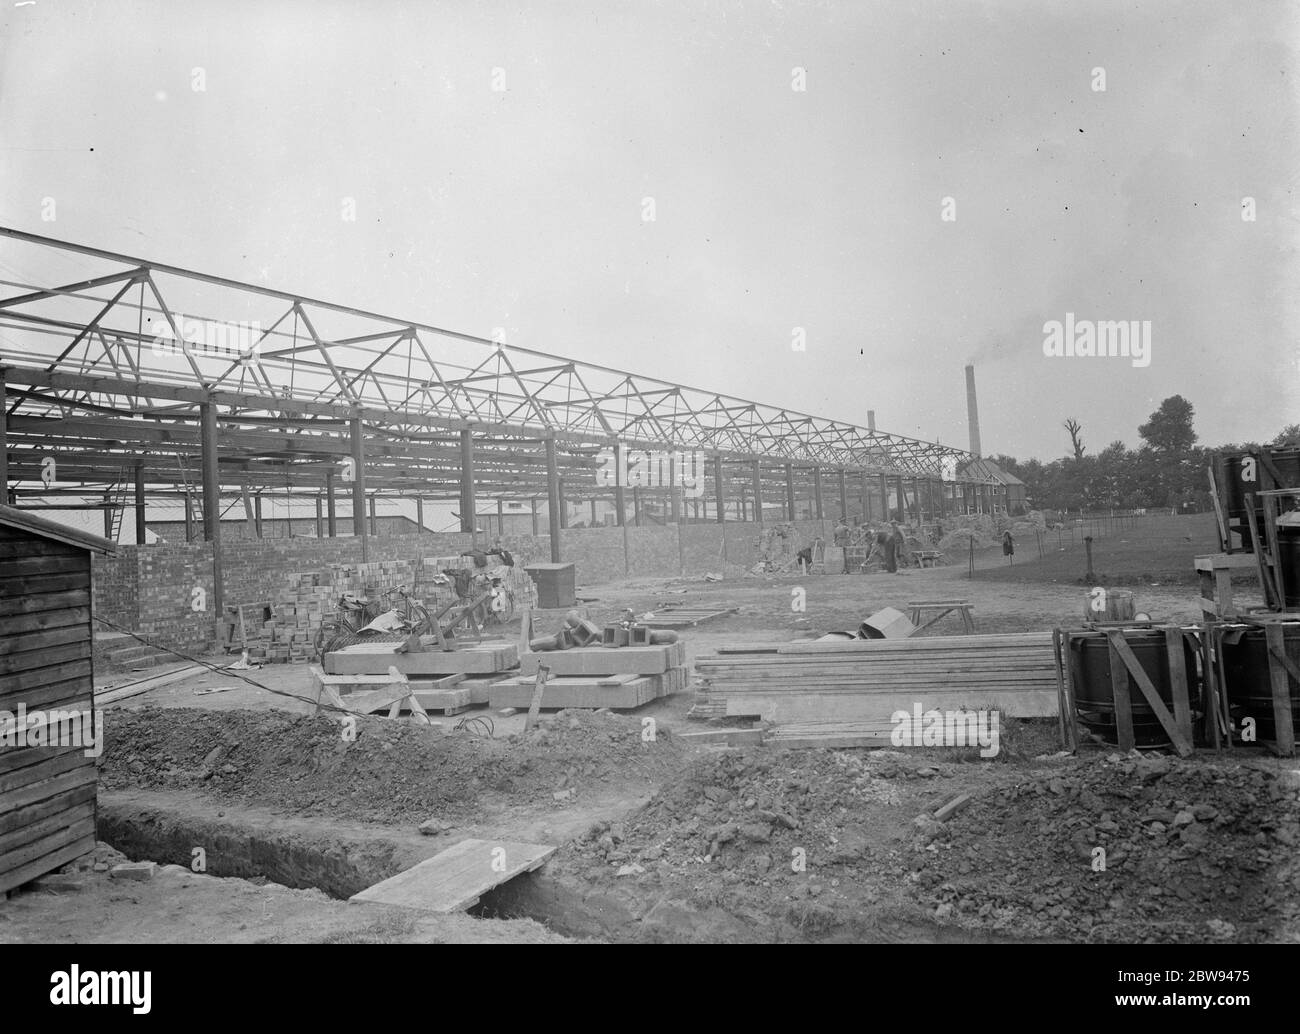 The St Helens Cable & Rubber Company Limited factory being constructed in Slough , Buckinghamshire . The steel work is being carried out by Edward Wood & Company . 1938 Stock Photo